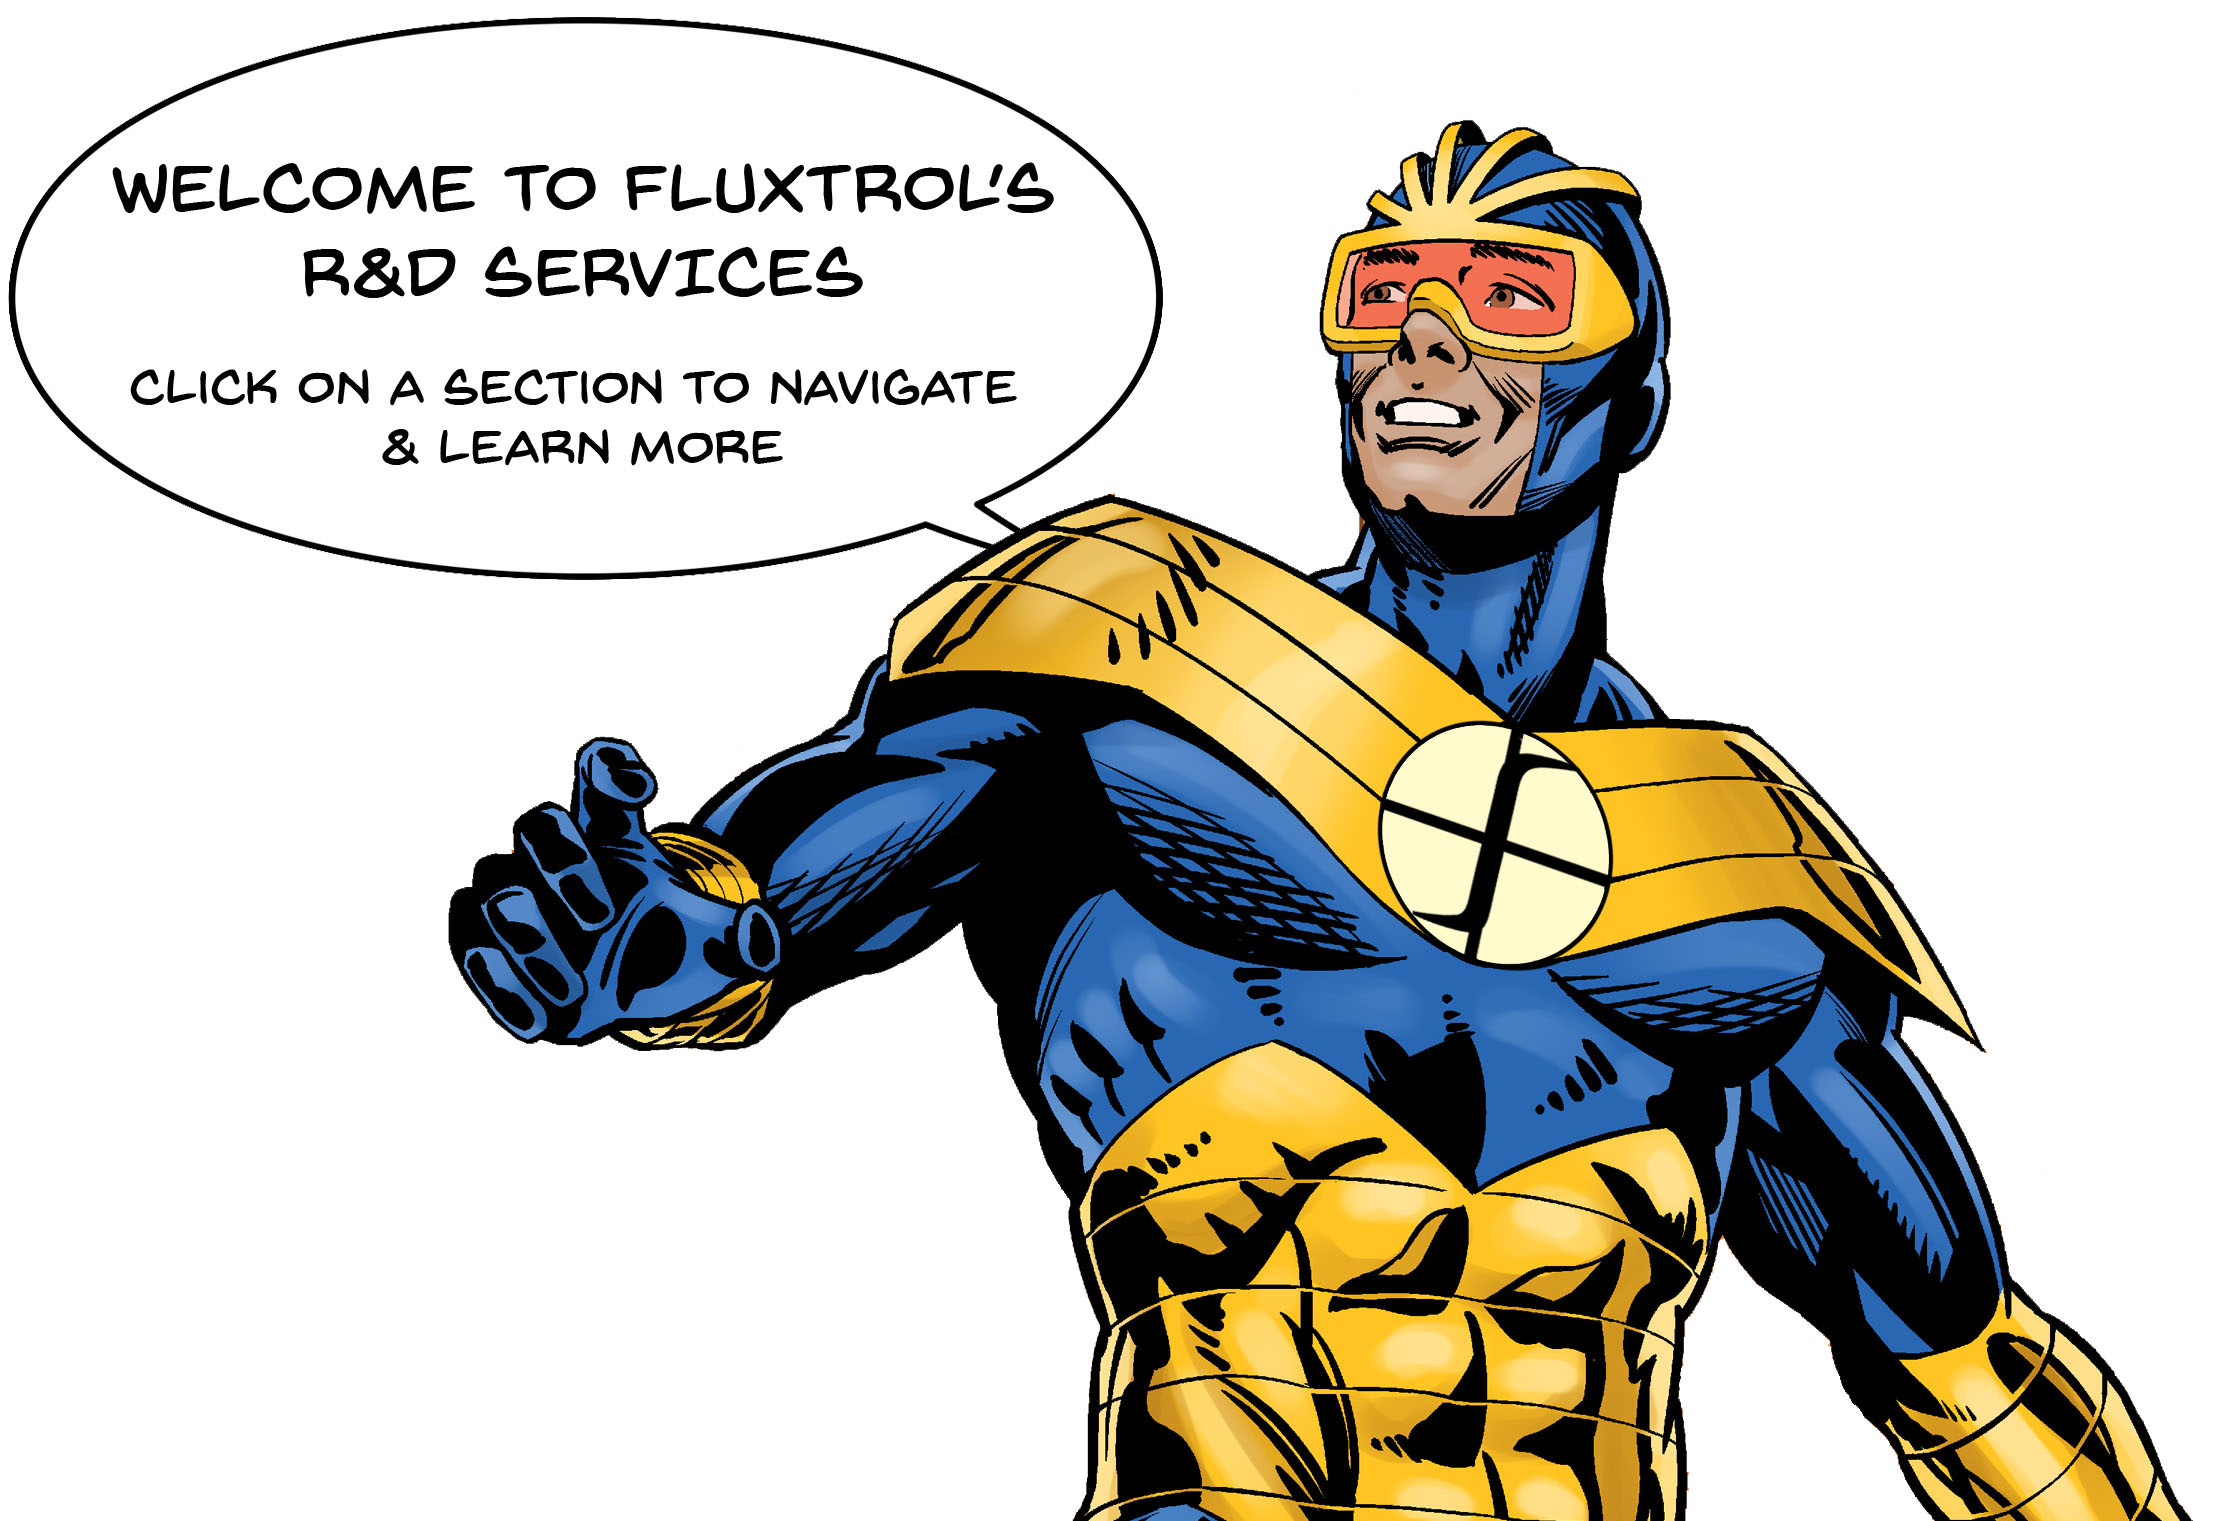 Fluxtrol Man Research and Development Services